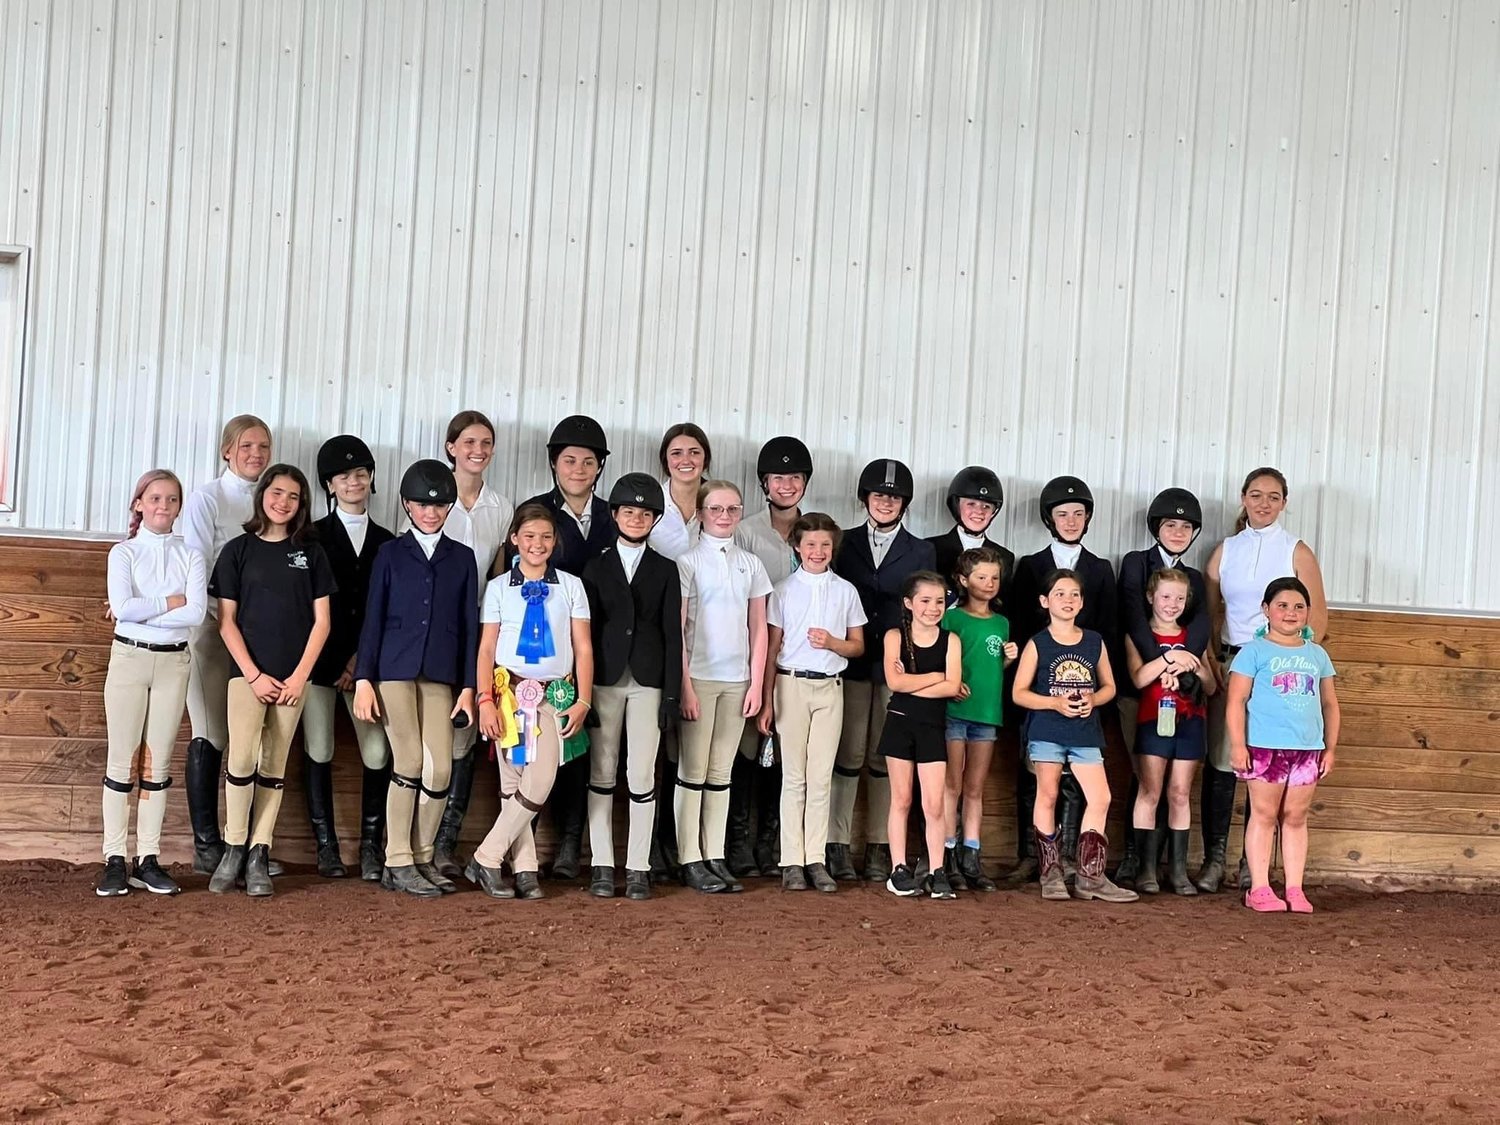 The Diehl Us In 4-H Club had a busy summer.